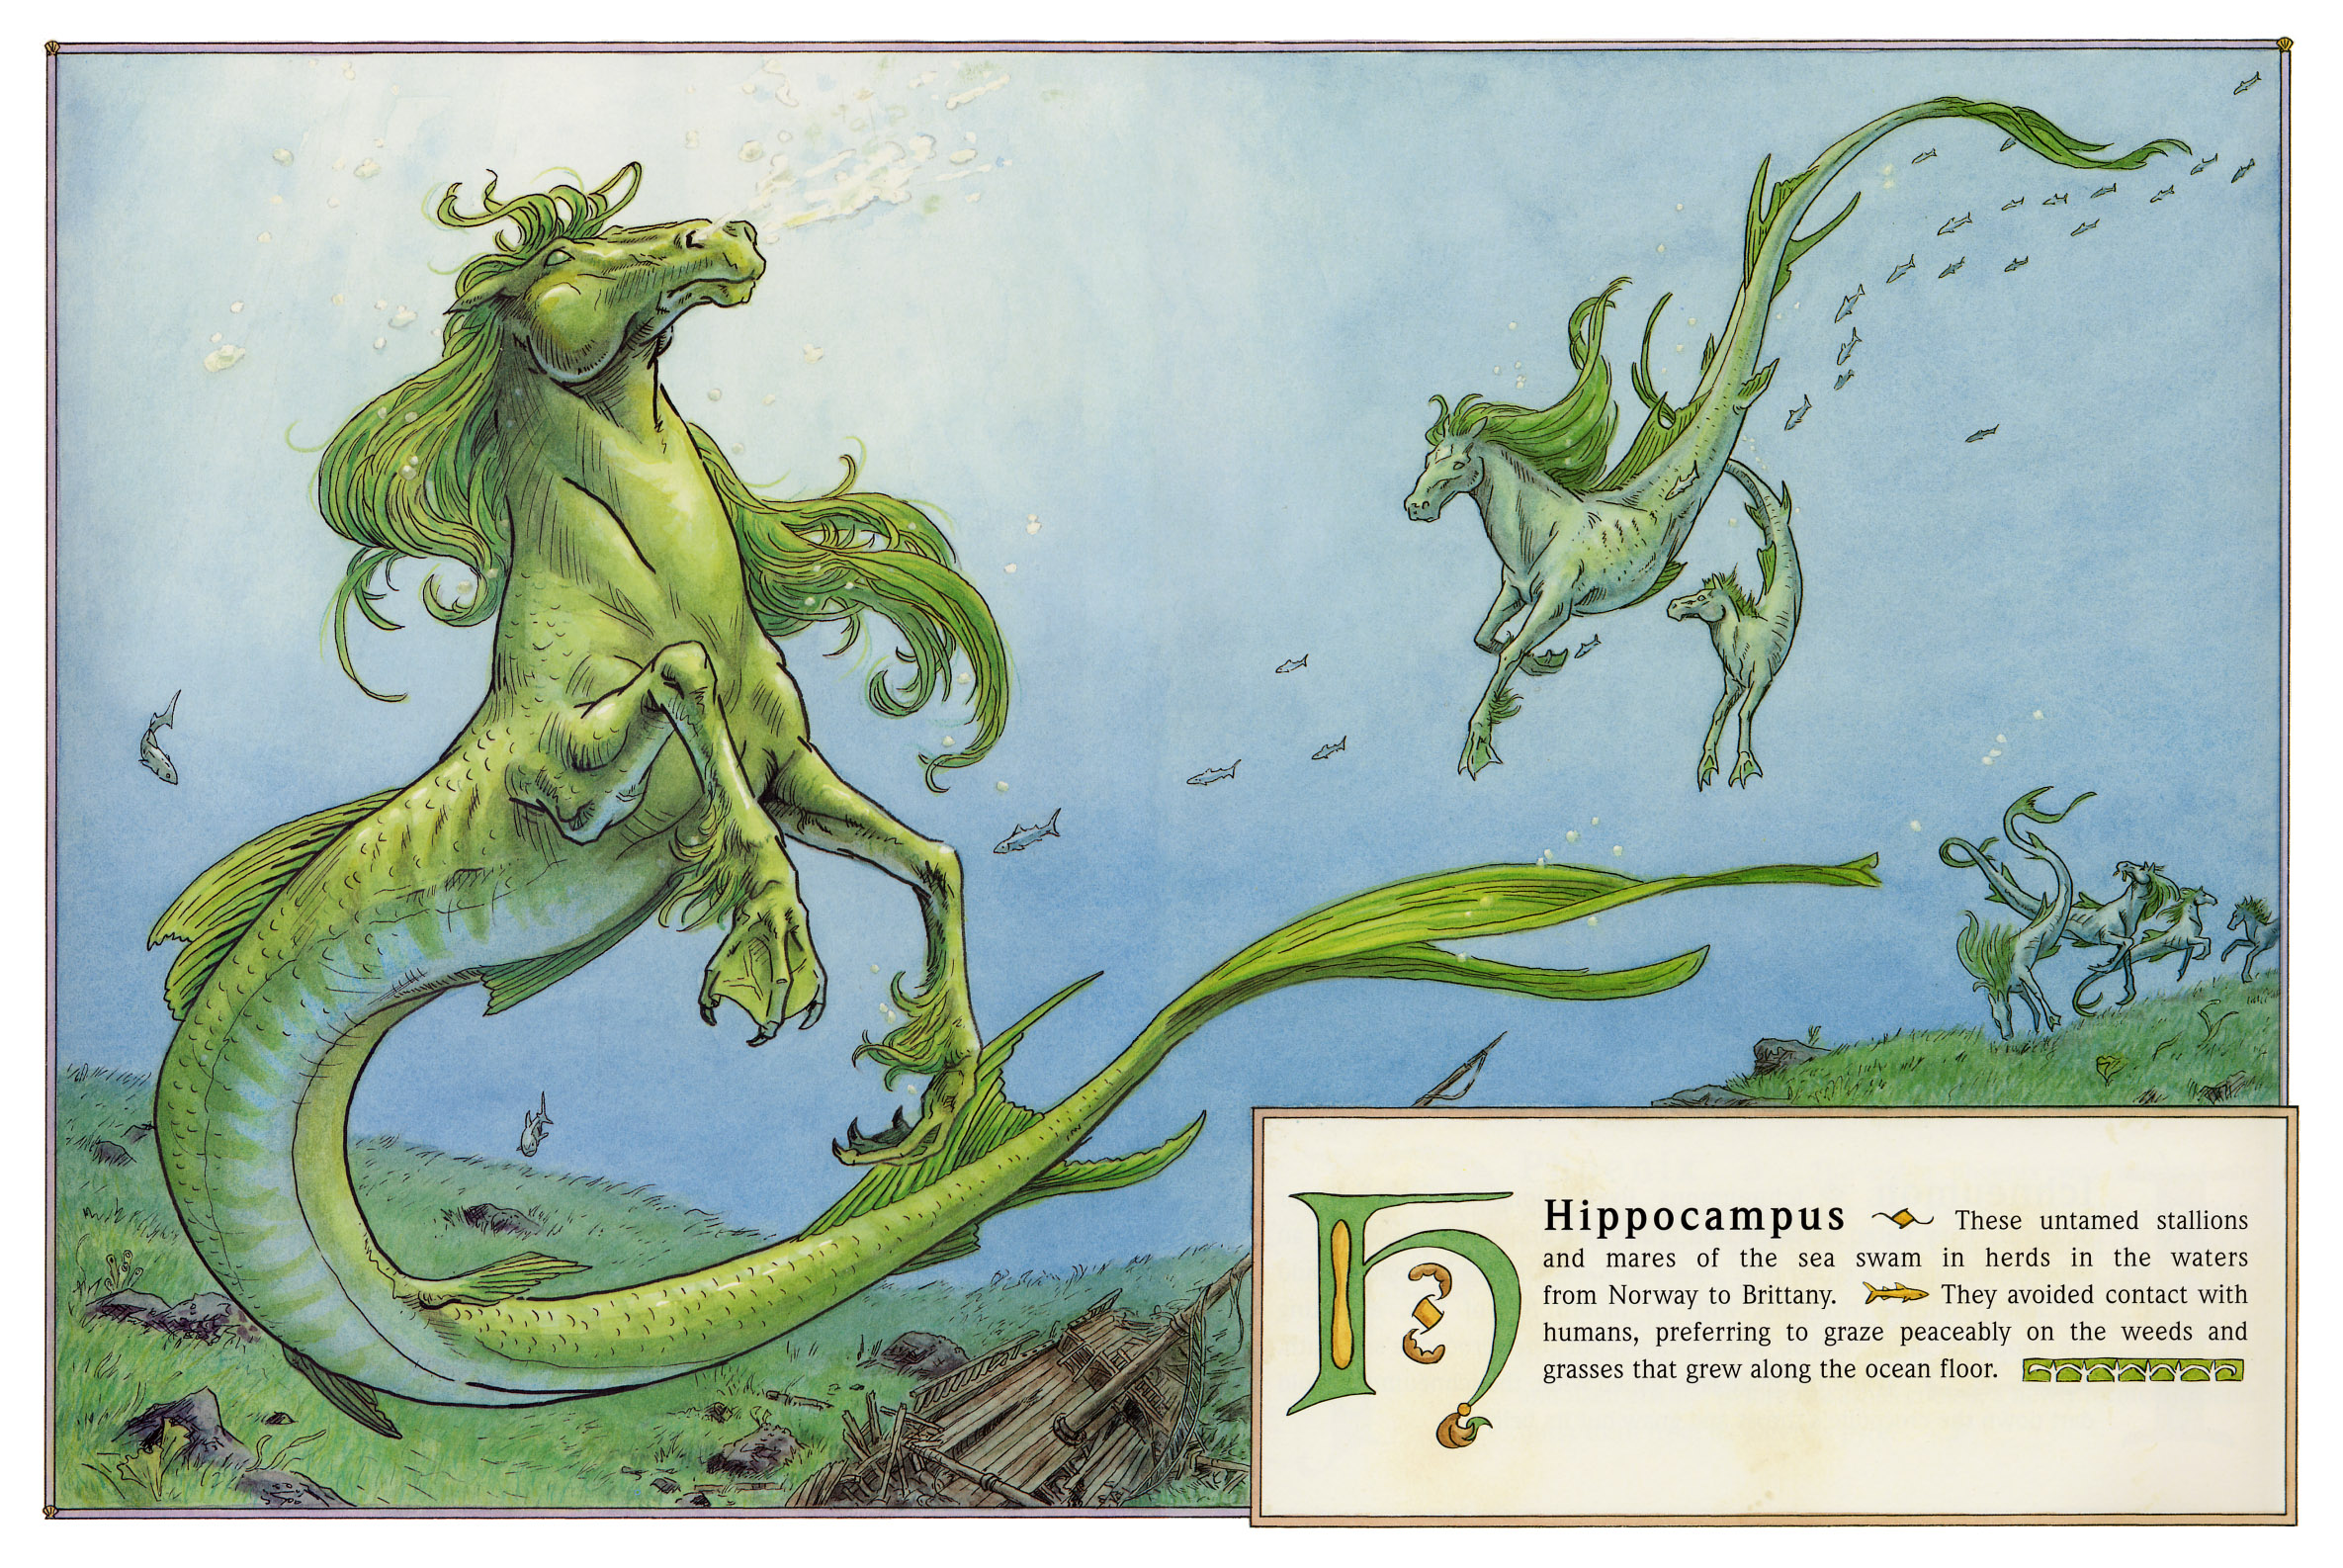 facts about hippocampus mythology